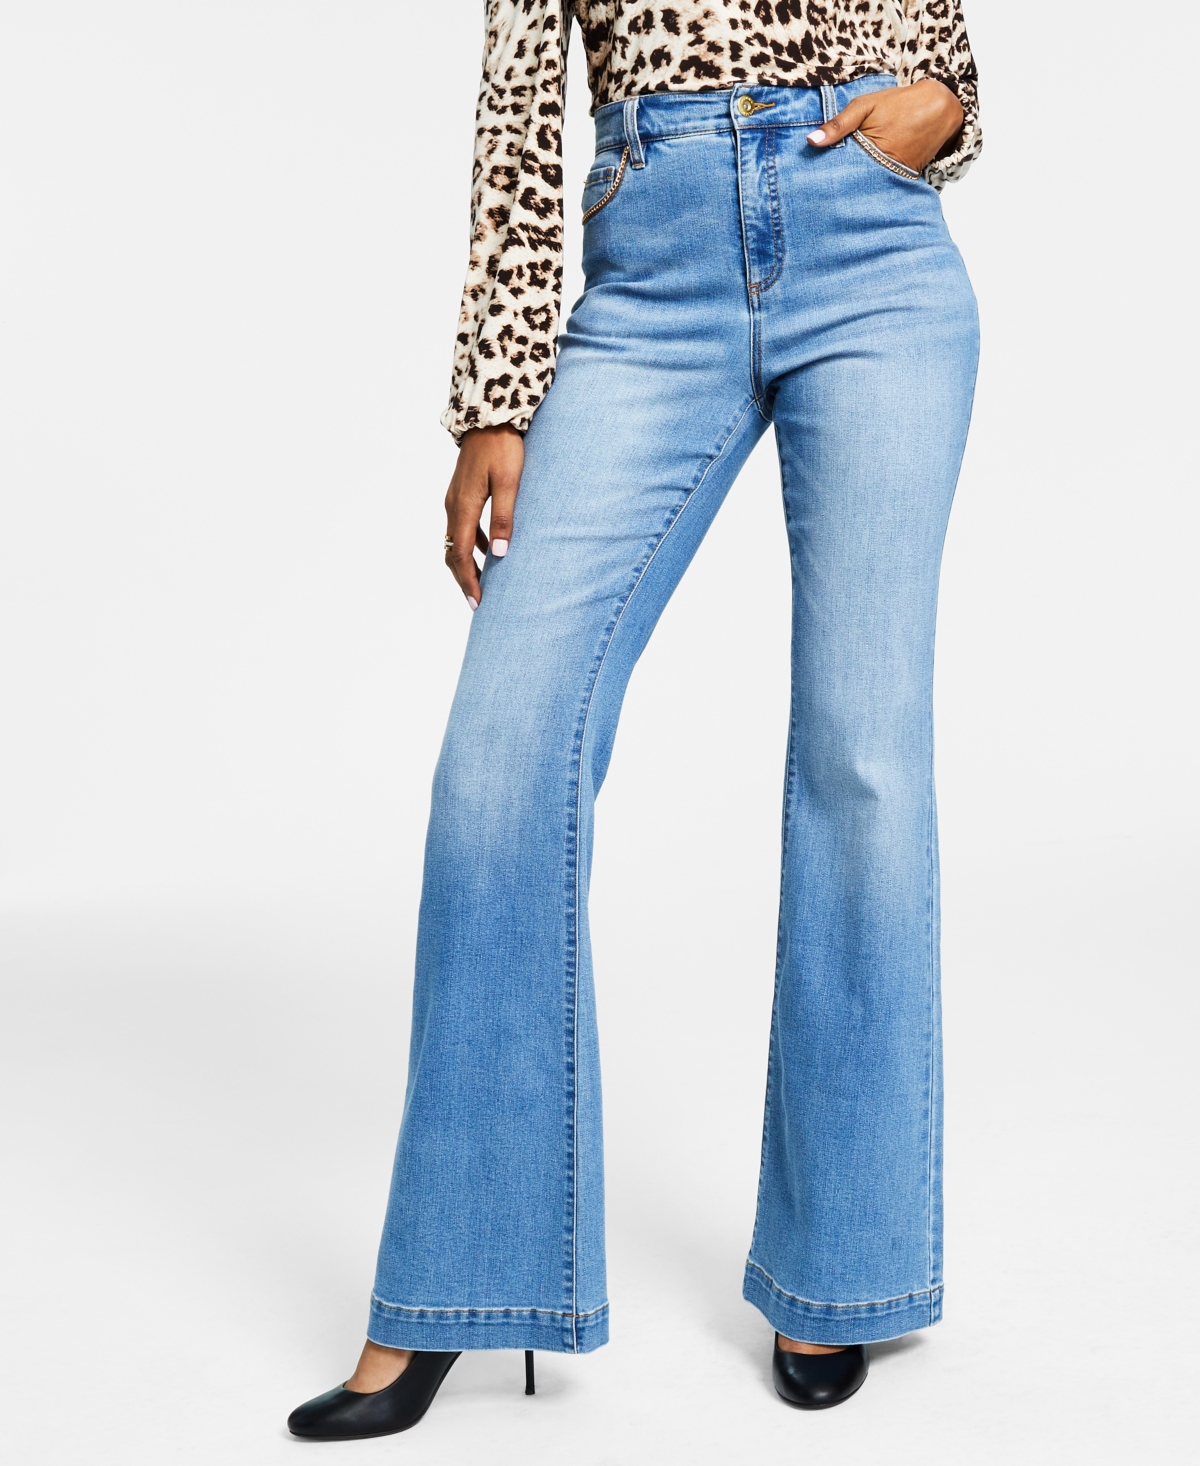  Inc International Concepts Women's High-Rise Chain-Trim Jeans, Created for Macy's